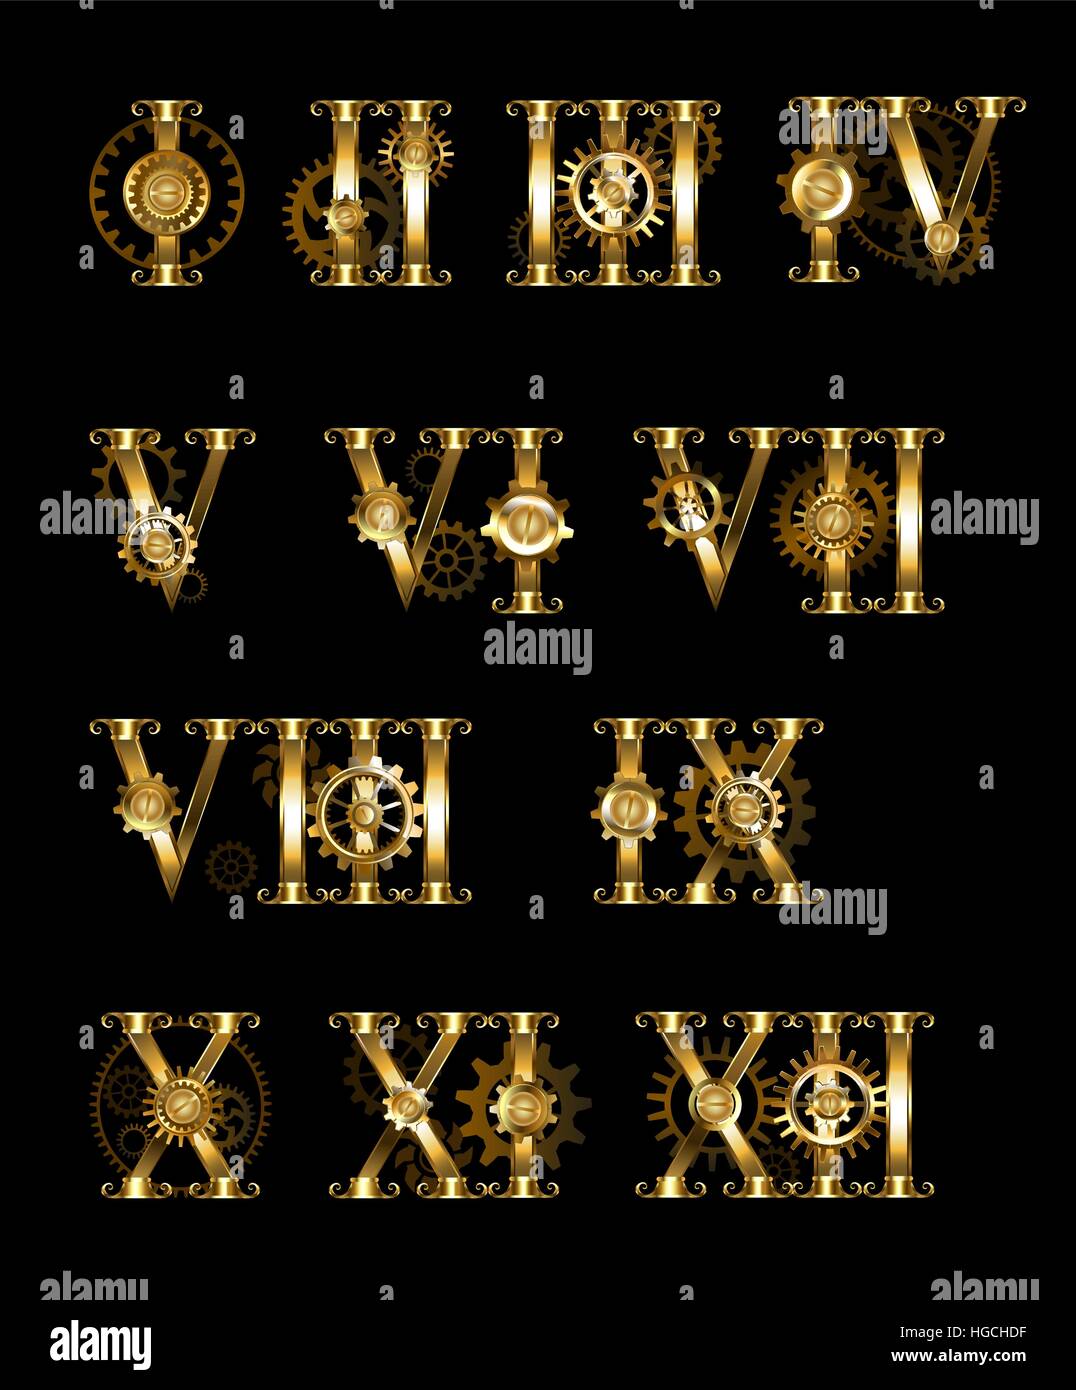 Set of gold, jewelry, isolated Roman numerals set with gears on a black background. Steampunk. Design with golden gears. Gothic style. Stock Vector